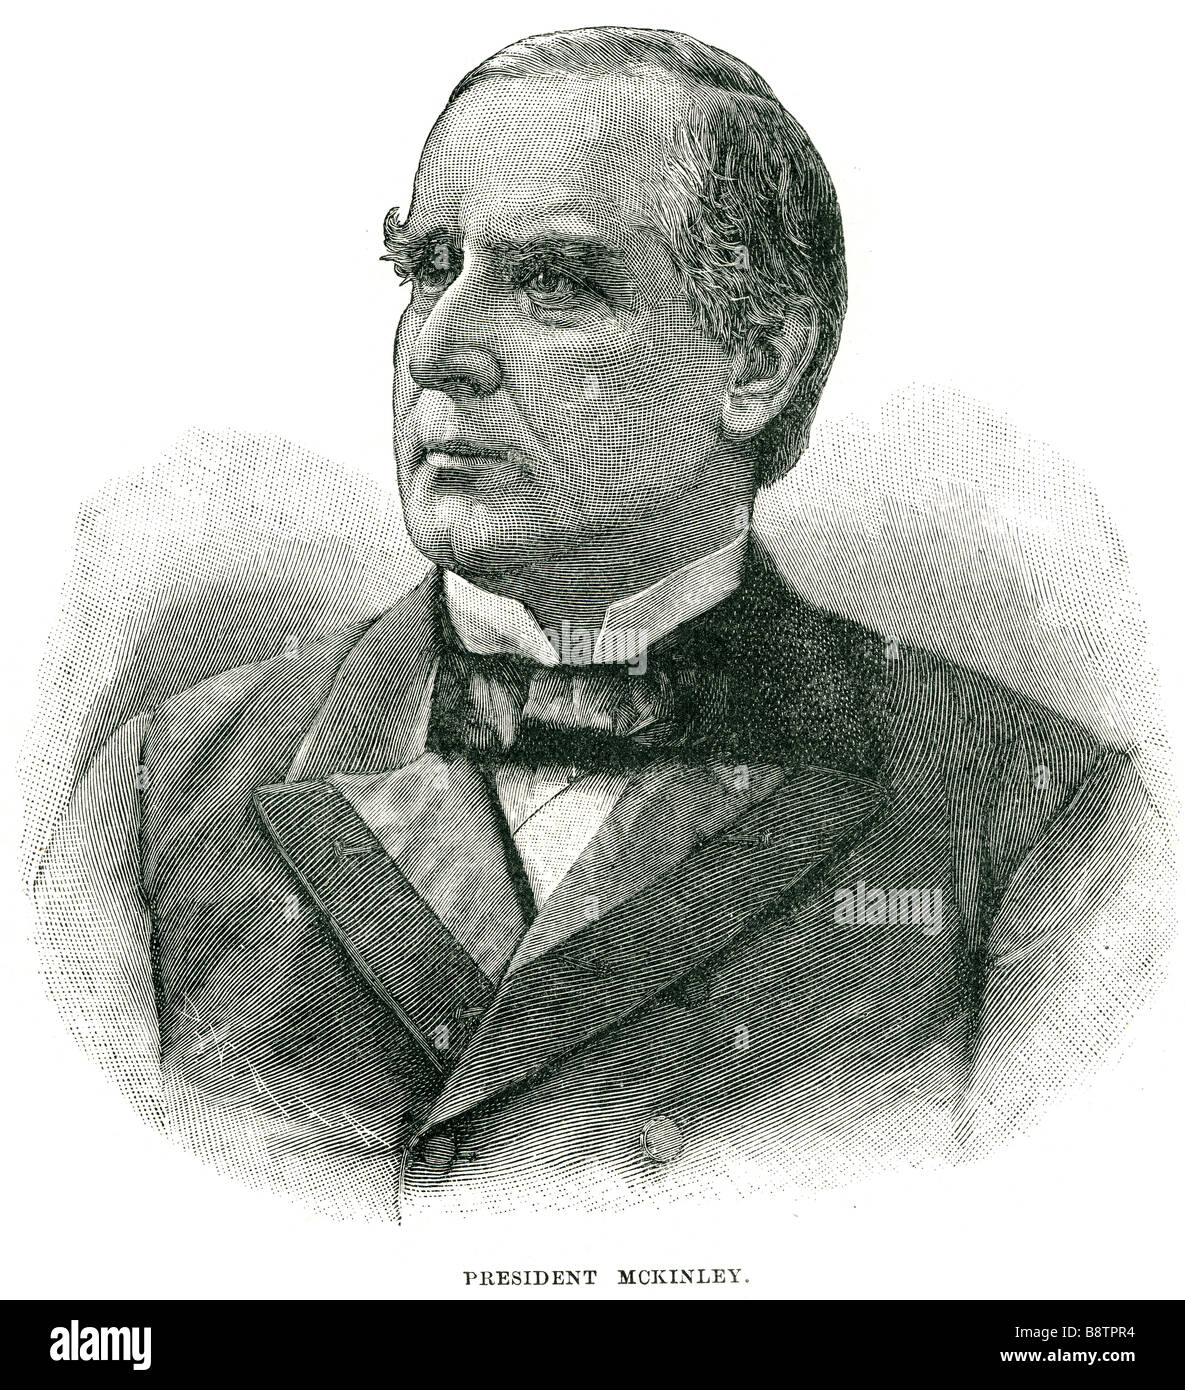 president mckinley William McKinley, Jr. (January 29, 1843 – September 14, 1901) was the 25th President of the United States, an Stock Photo